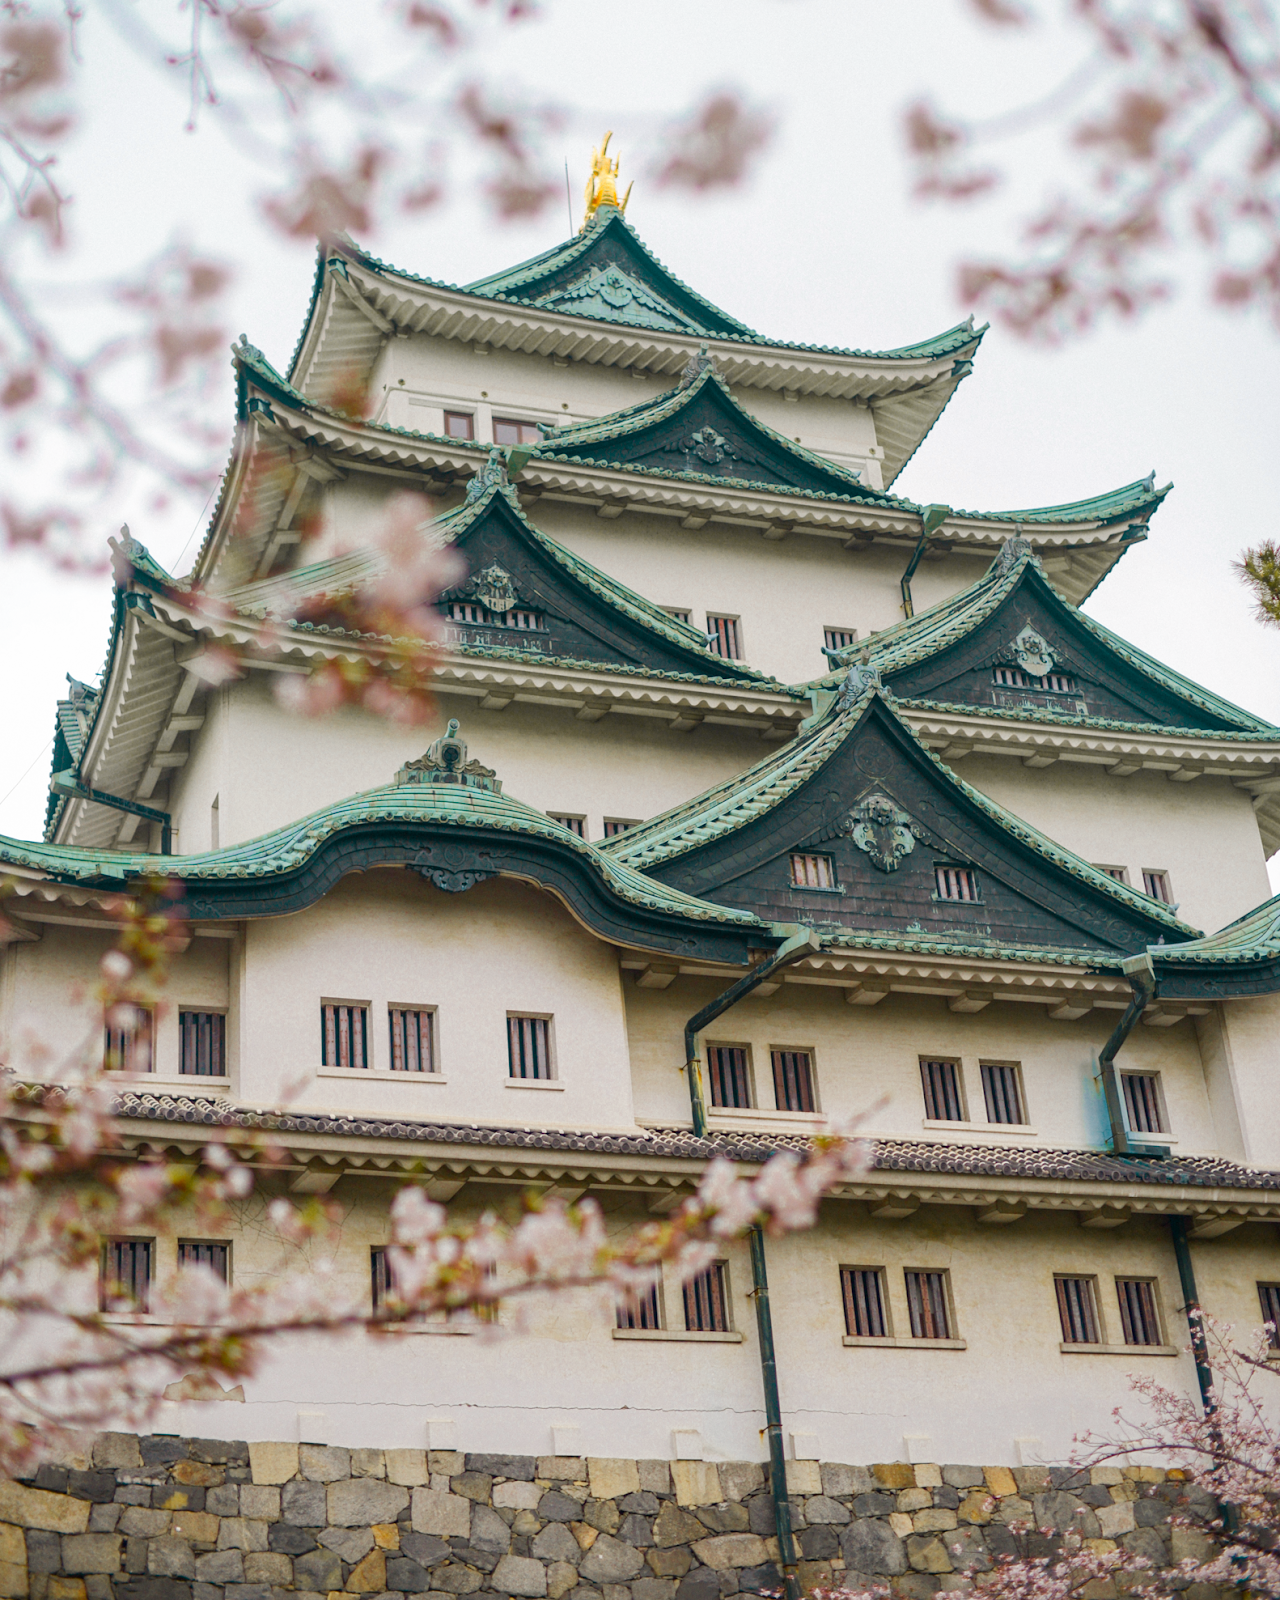 Osaka castle view with cherry blossoms, Osaka during the Spring